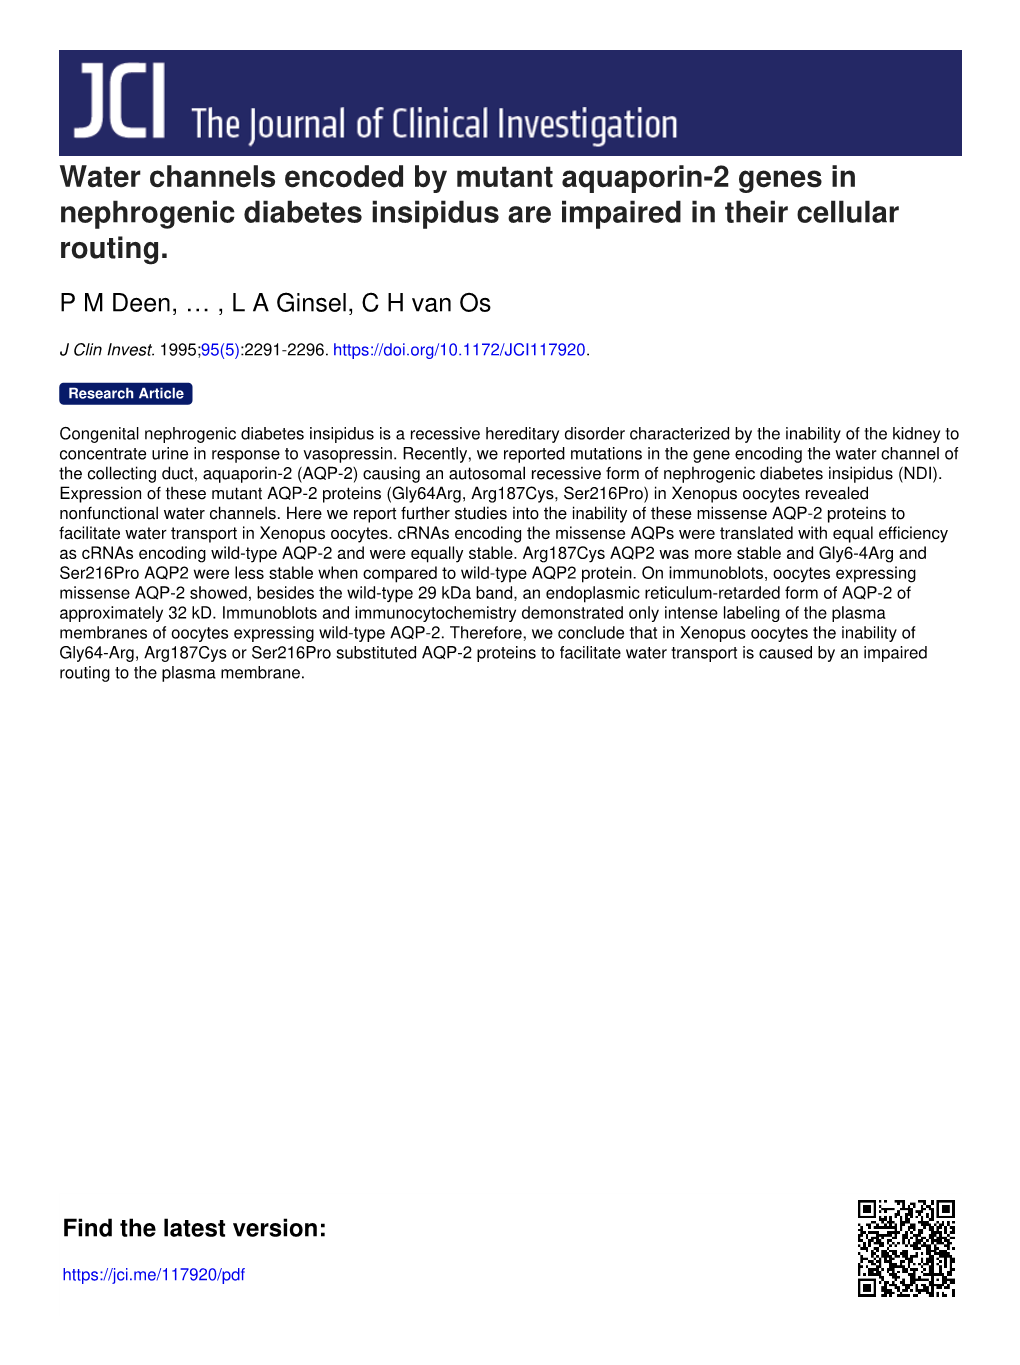 Water Channels Encoded by Mutant Aquaporin-2 Genes in Nephrogenic Diabetes Insipidus Are Impaired in Their Cellular Routing